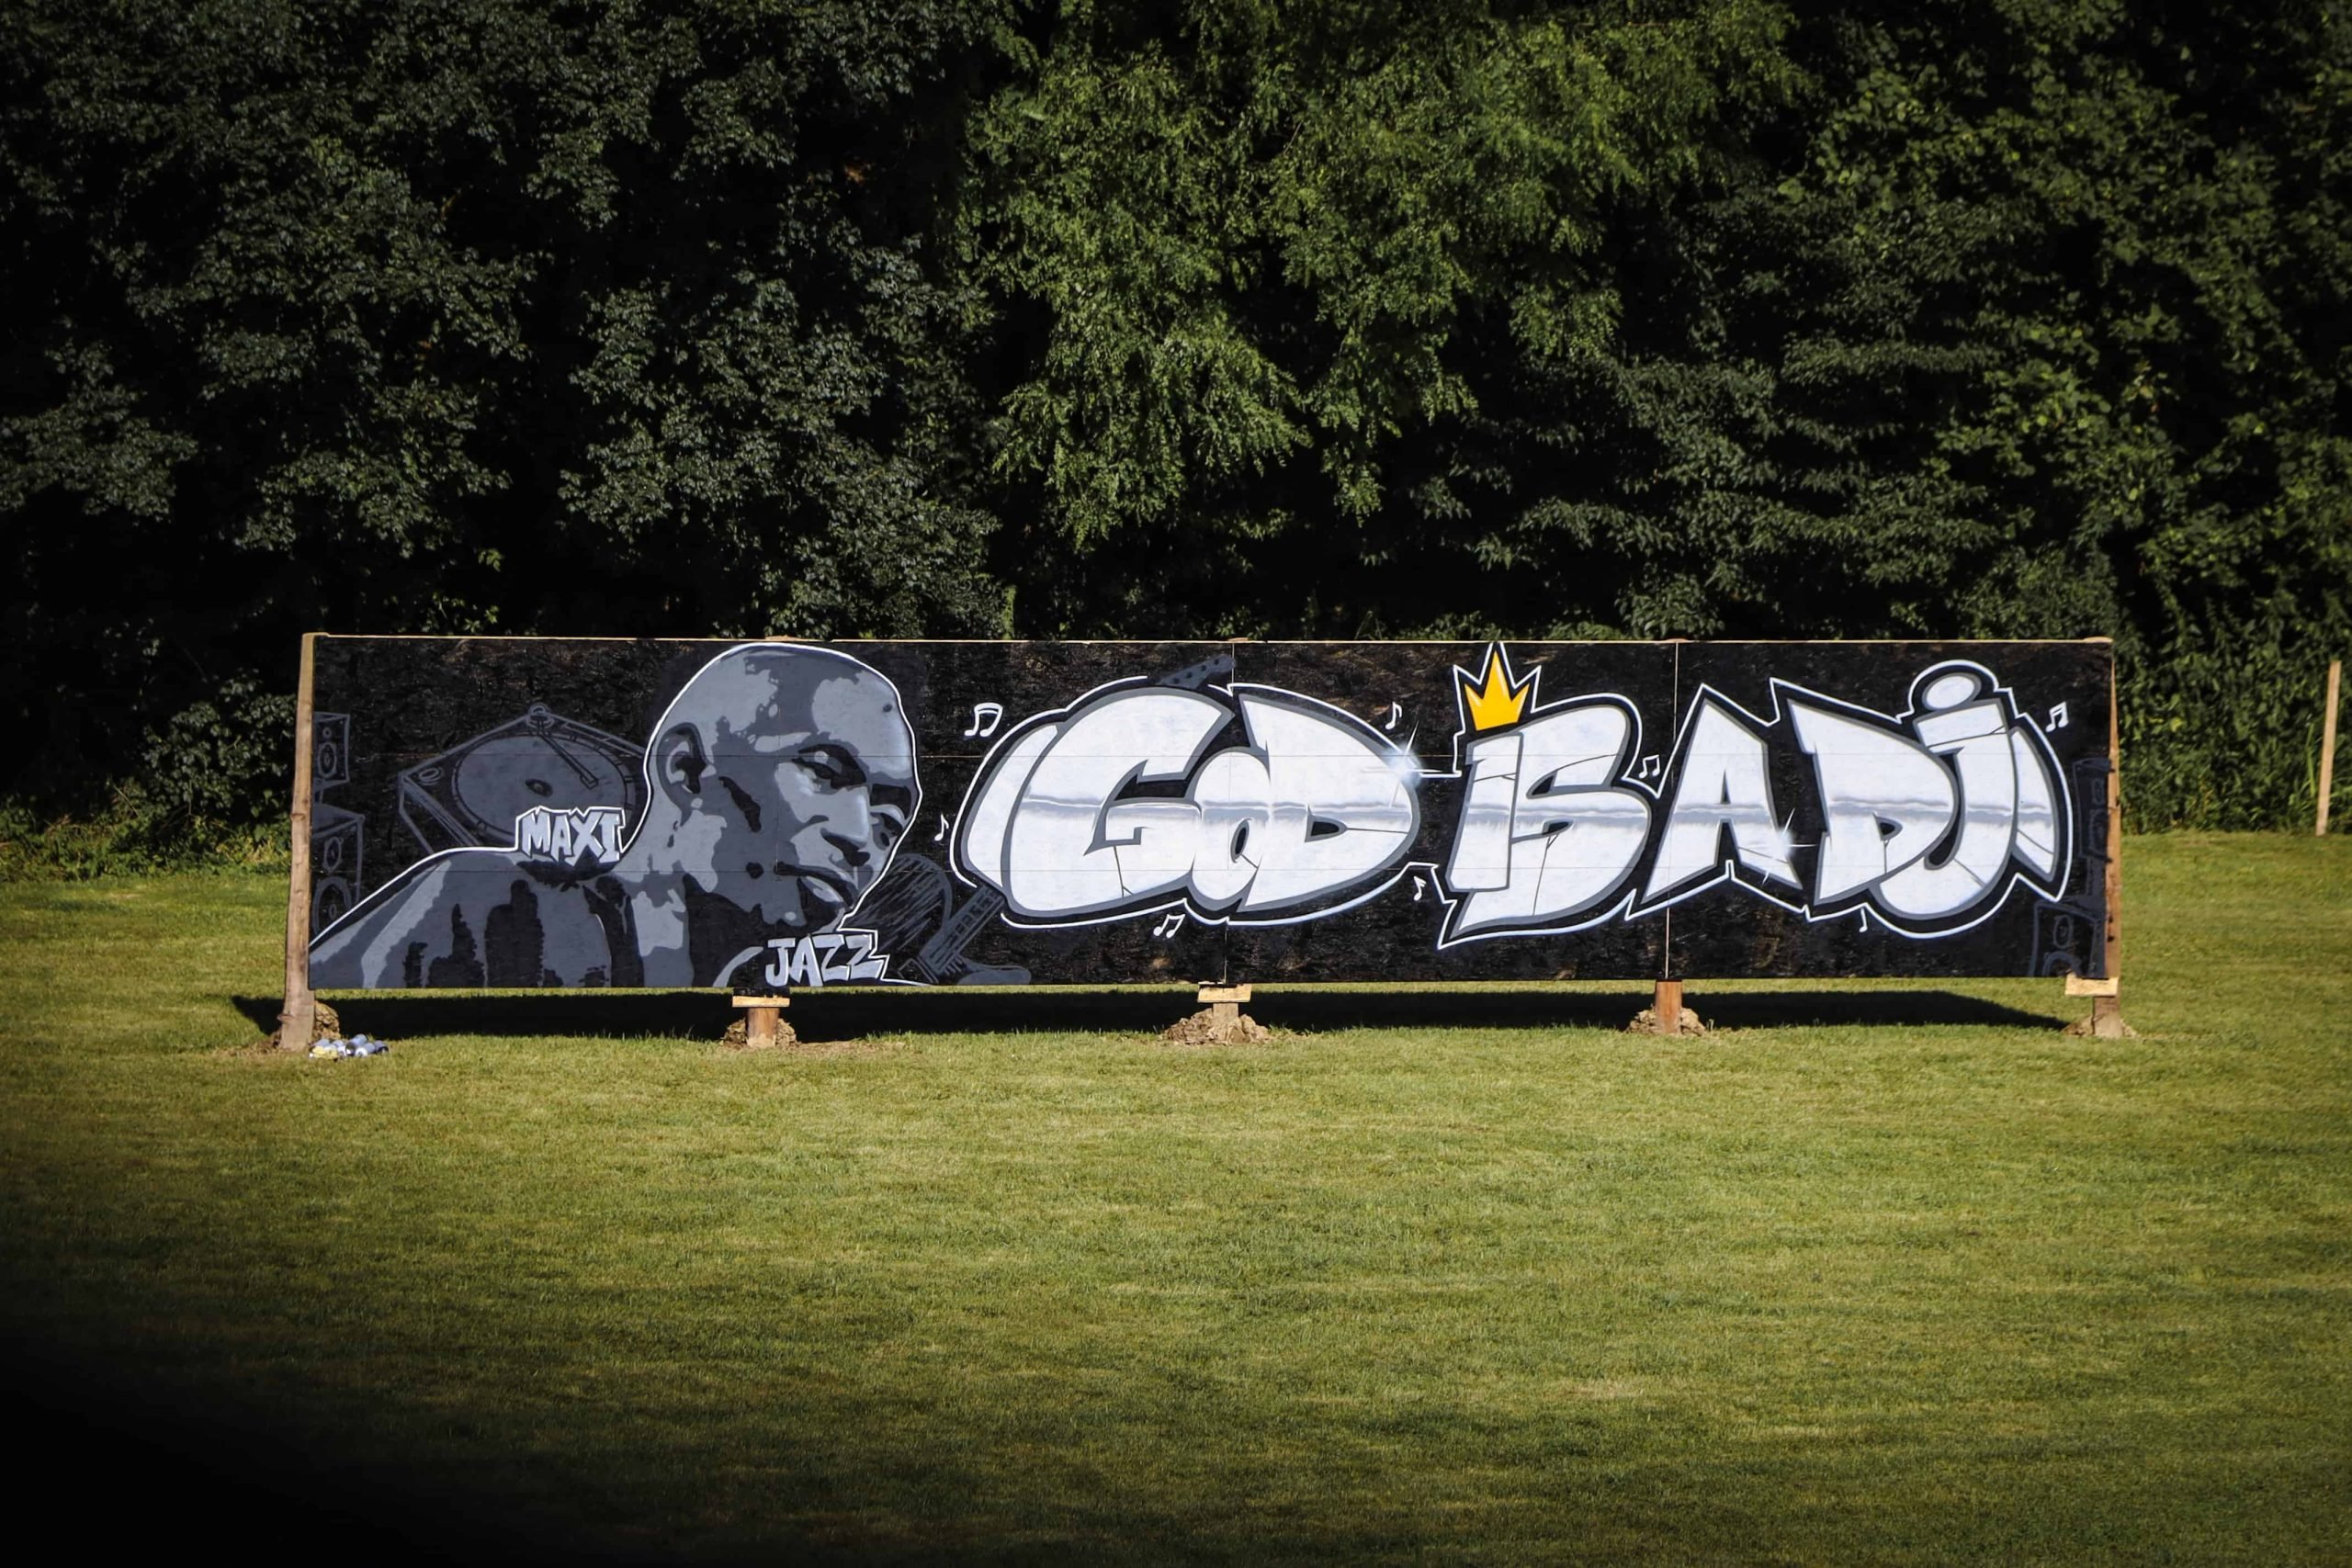 Forestland Festival pays tribute to Maxi Jazz with graffiti mural: honoring a music legend